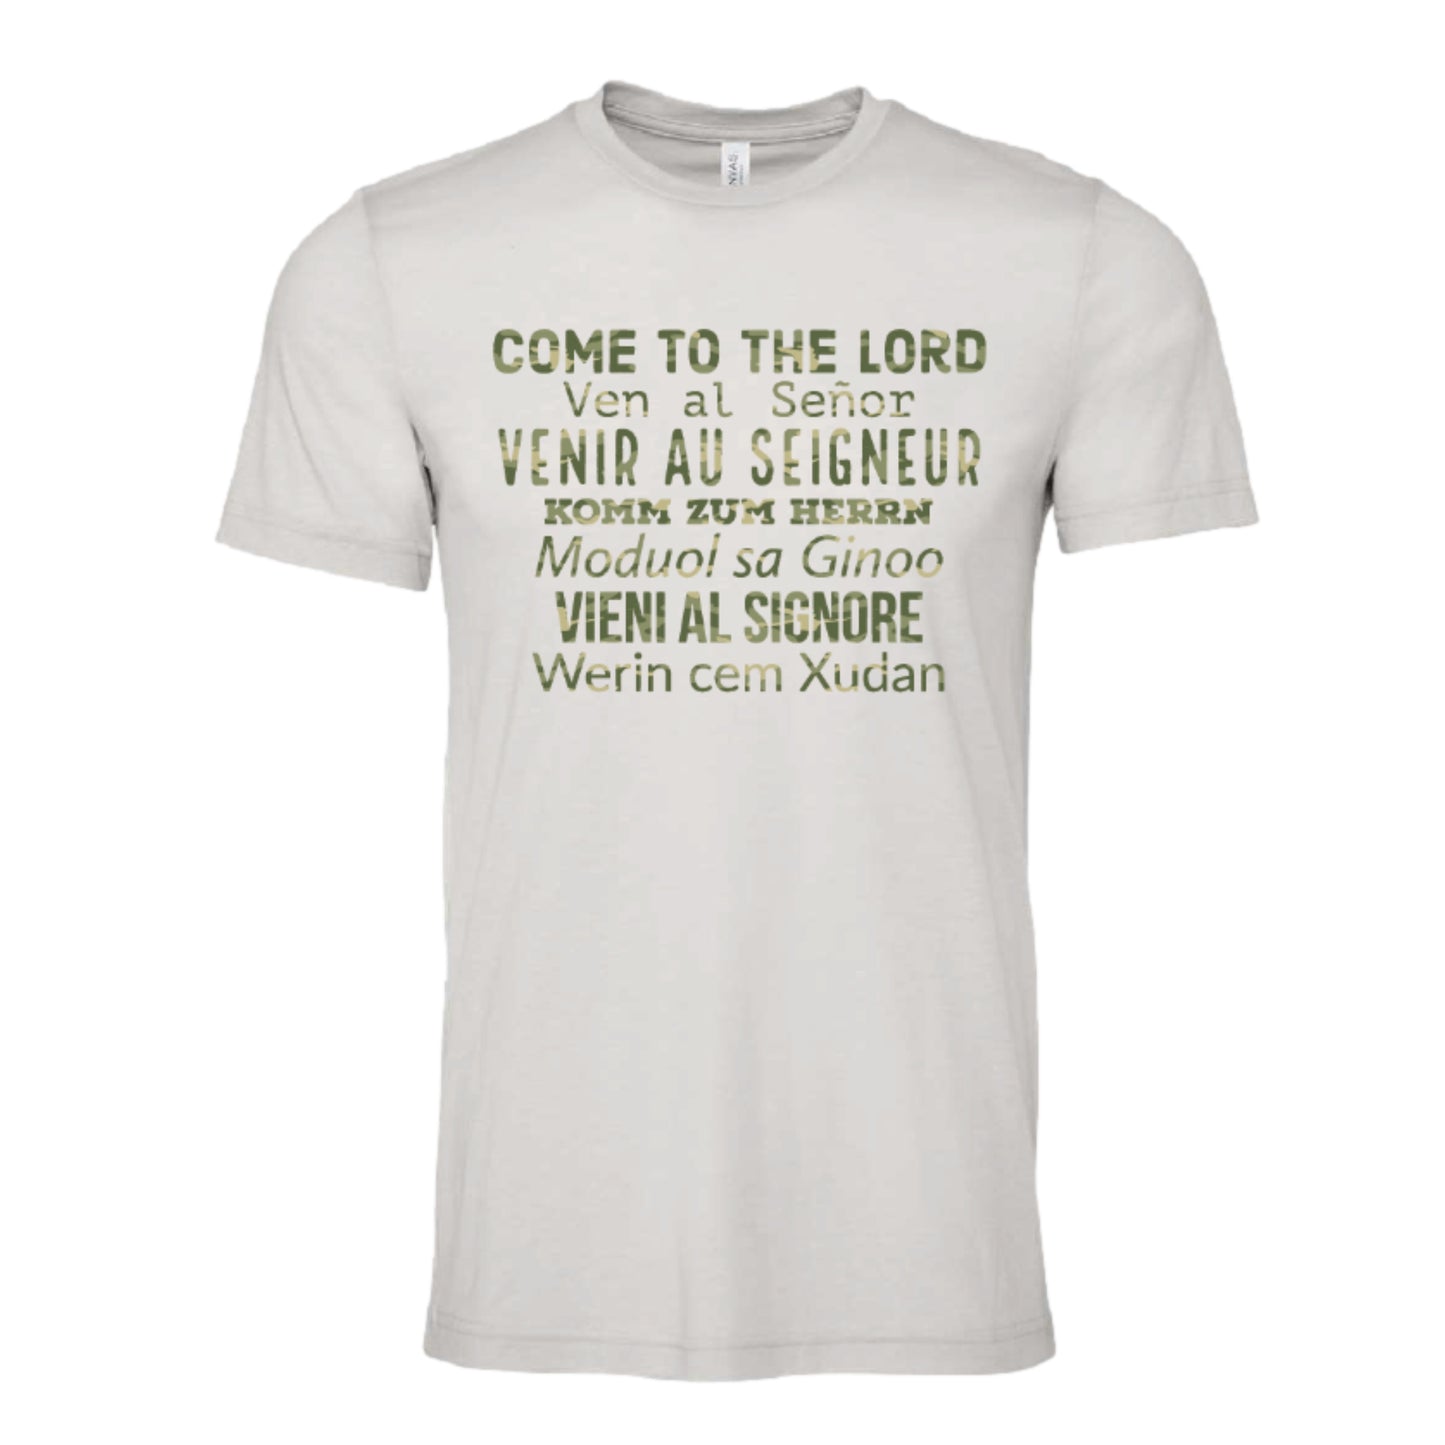 Come to the Lord Tee